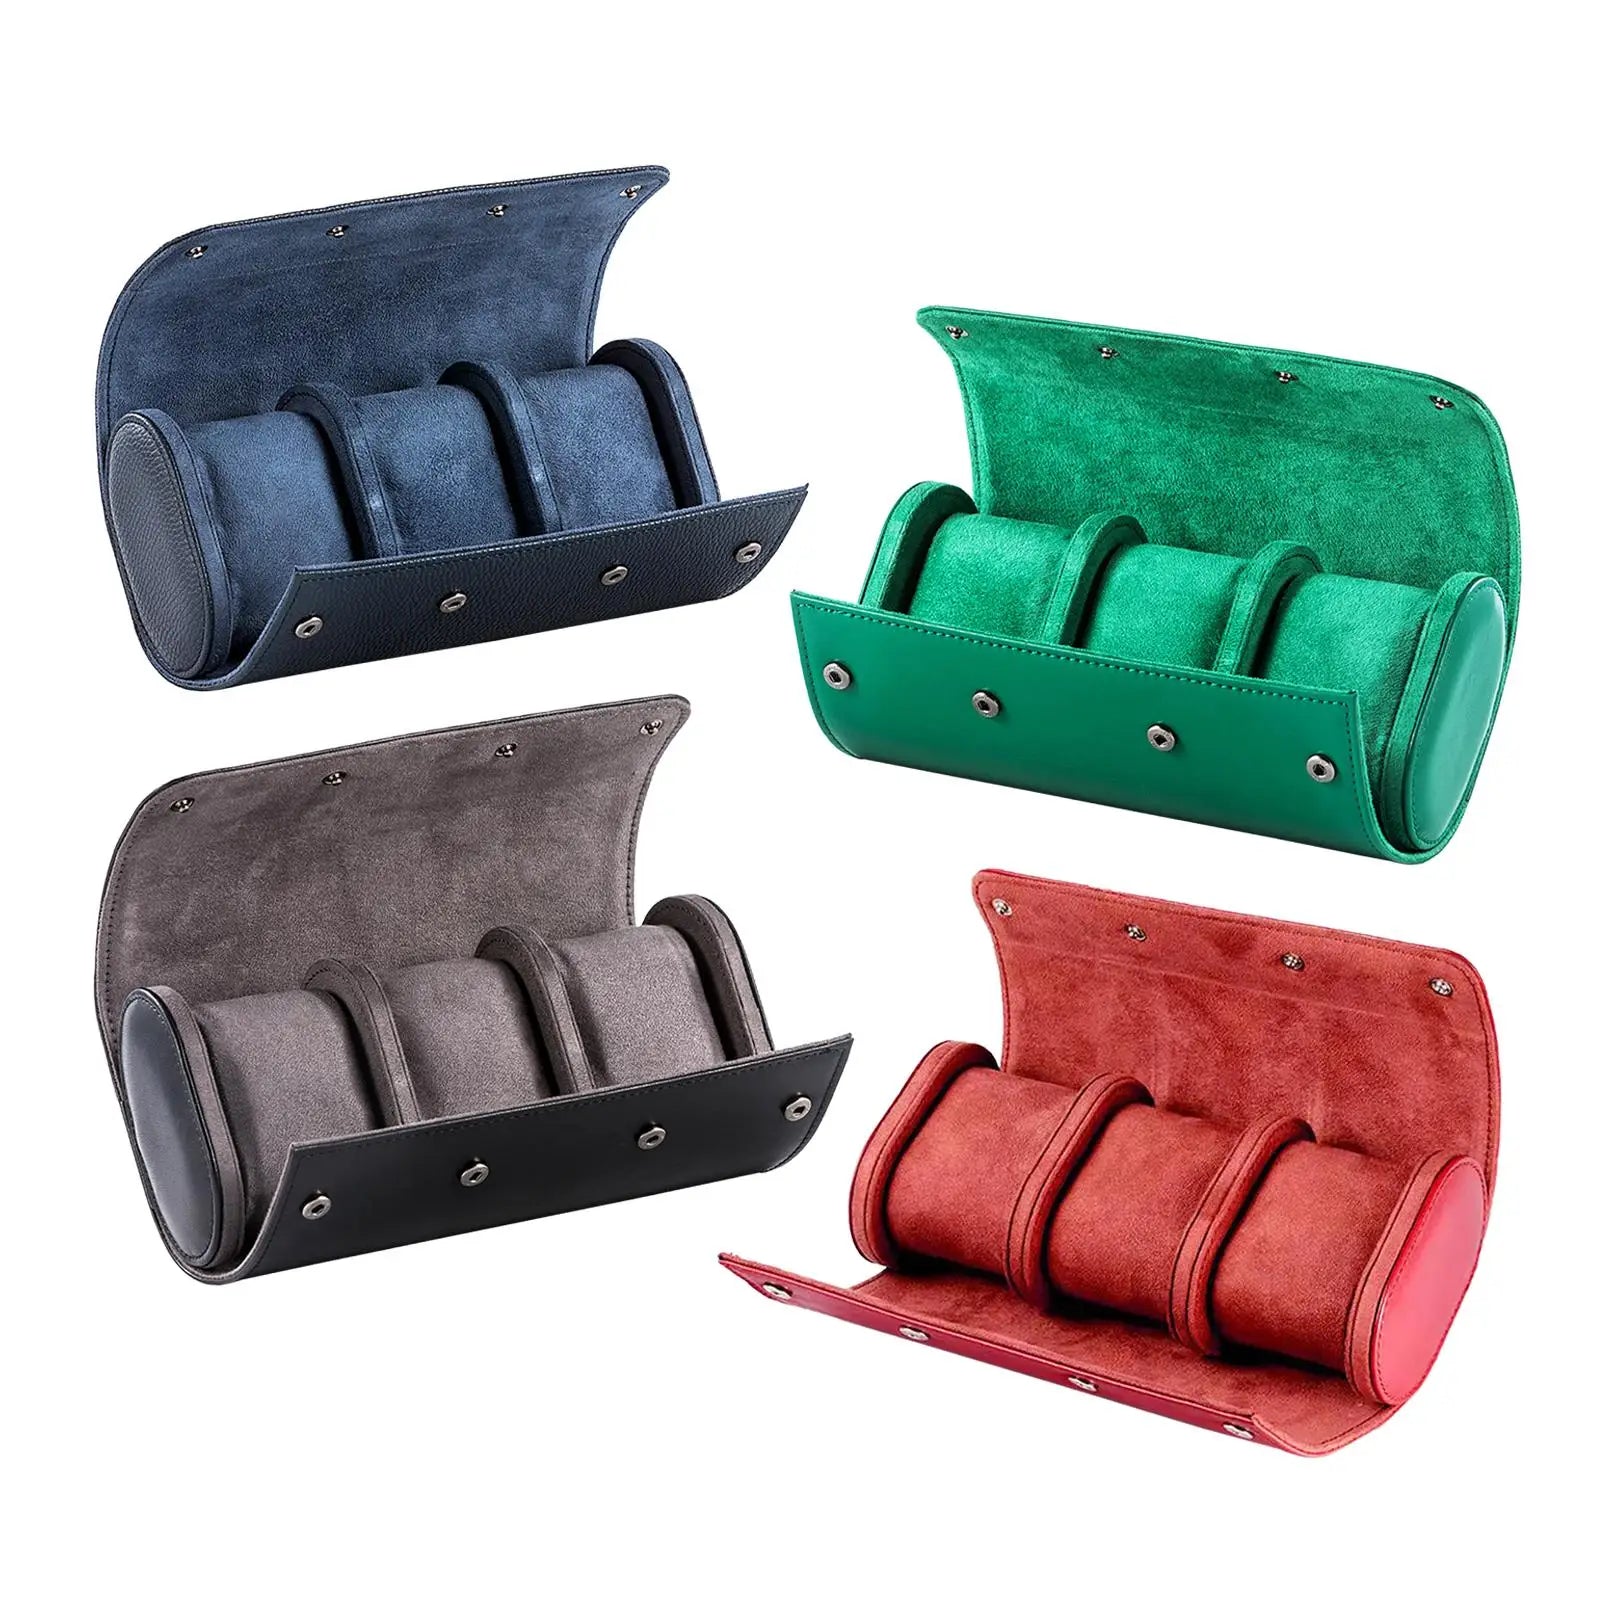 Chic Vintage PU Leather Watch Roll Travel Case with Multiple Slots and Gift-Worthy Design  OurLum.com   